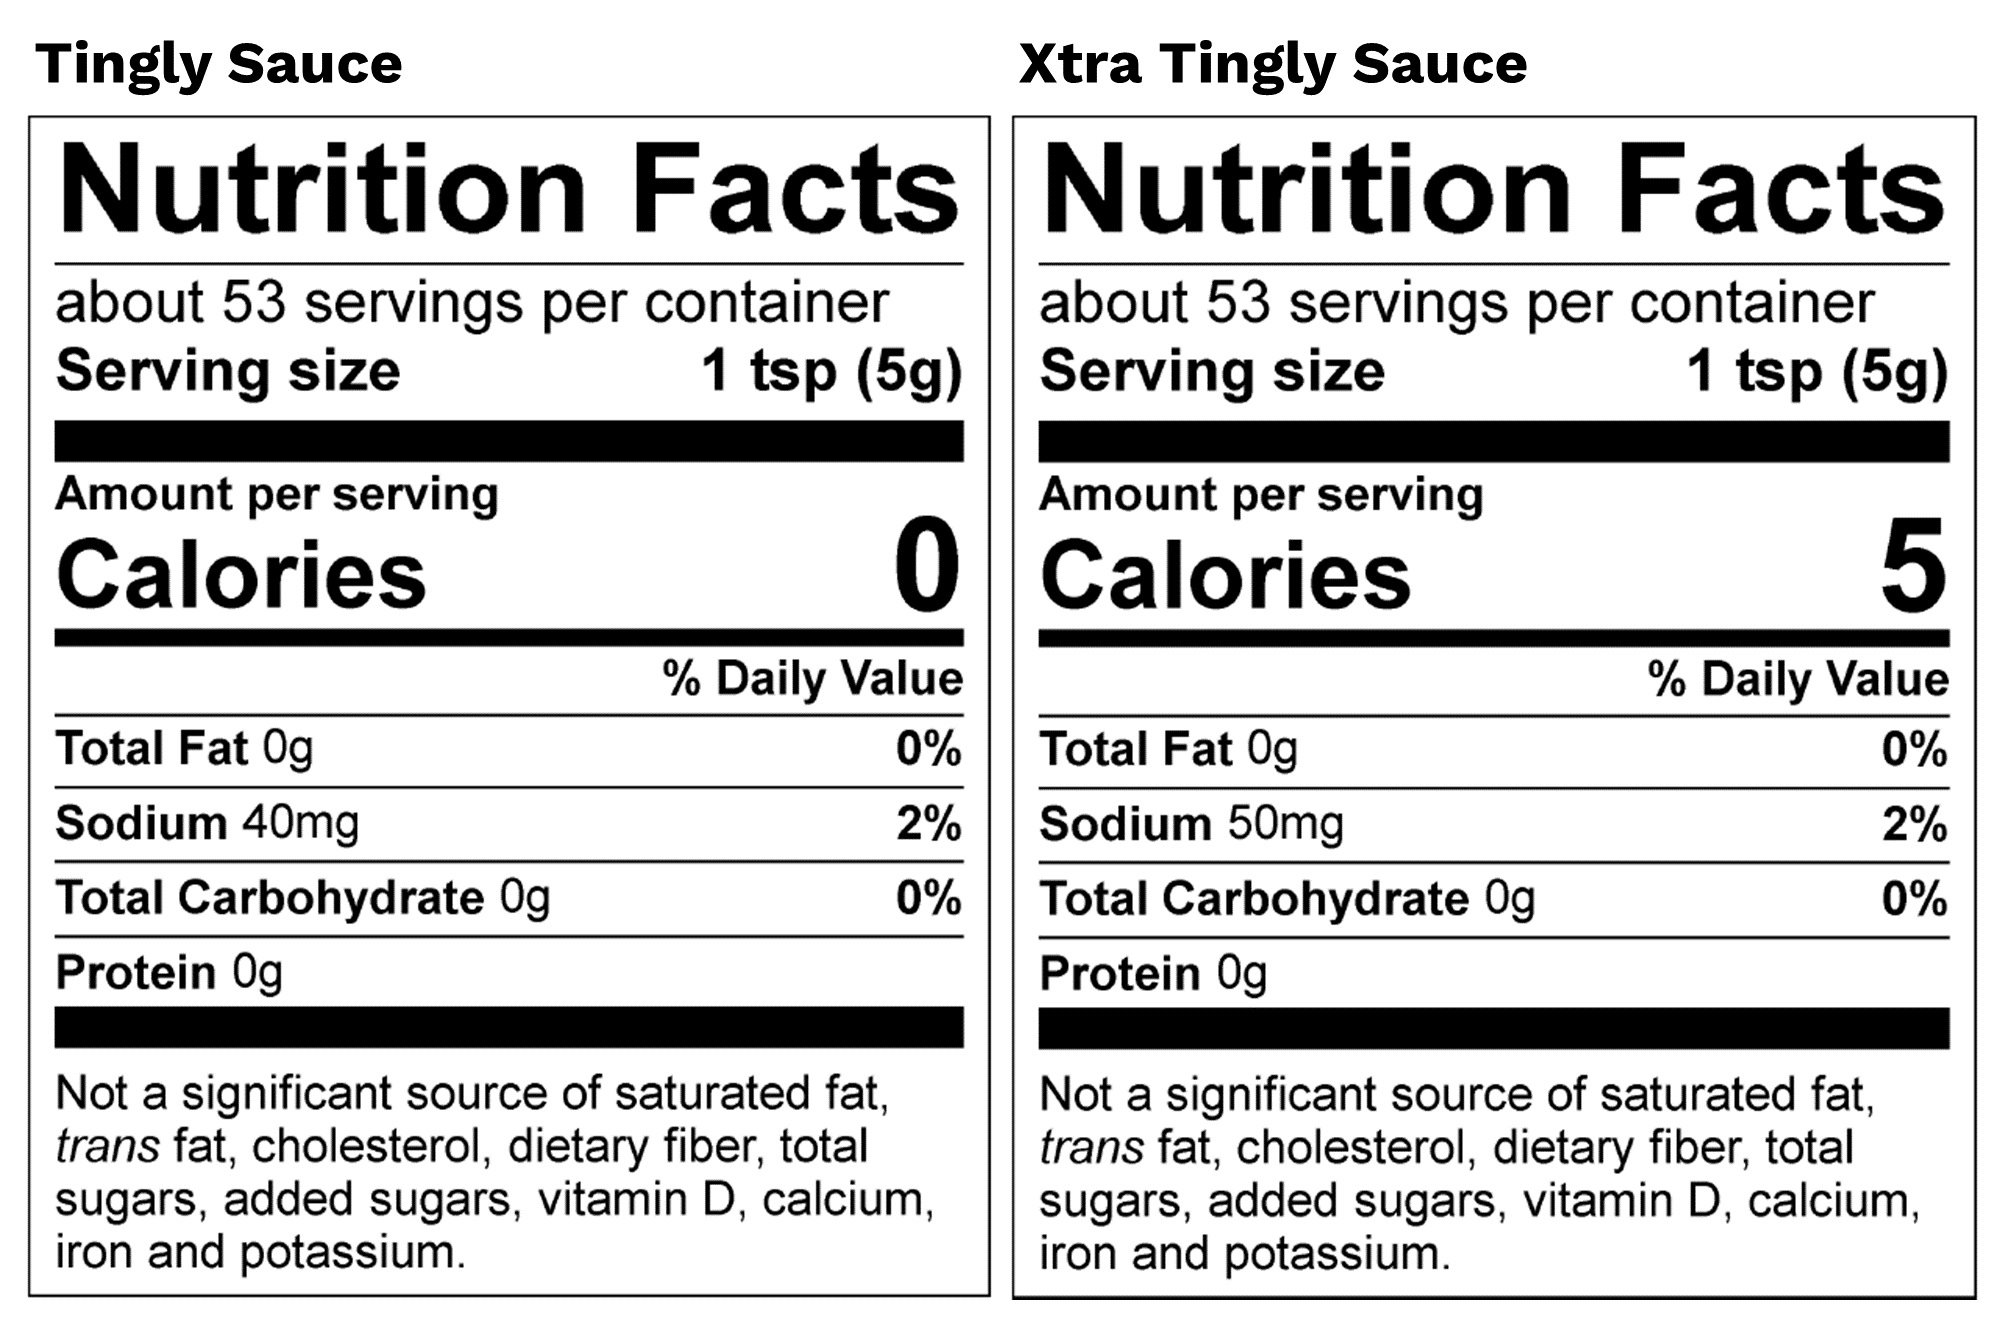 Tingly Sauce

                                  Xtra Tingly Sauce

                                  Nutrition Facts

                                  Nutrition Facts

                                  about 53 servings per container
                                  Serving size 1 tsp (59)
                                  |

                                  Amount per serving

                                  about 53 servings per container
                                  Serving size 1 tsp (59)
                                  |

                                  Amount per serving

                                  Calories 0 | calories 5

                                  % Daily Value % Daily Value
                                  Total Fat Og 0% | | Total Fat Og 0%
                                  Sodium 40mg 2% || Sodium 50mg 2%
                                  Total Carbohydrate Og 0% || Total Carbohydrate Og 0%
                                  Protein Og Protein Og

                                  Not a significant source of saturated fat,
                                  trans fat, cholesterol, dietary fiber, total
                                  sugars, added sugars, vitamin D, calcium,
                                  iron and potassium.

                                  Not a significant source of saturated fat,
                                  trans fat, cholesterol, dietary fiber, total
                                  sugars, added sugars, vitamin D, calcium,
                                  iron and potassium.